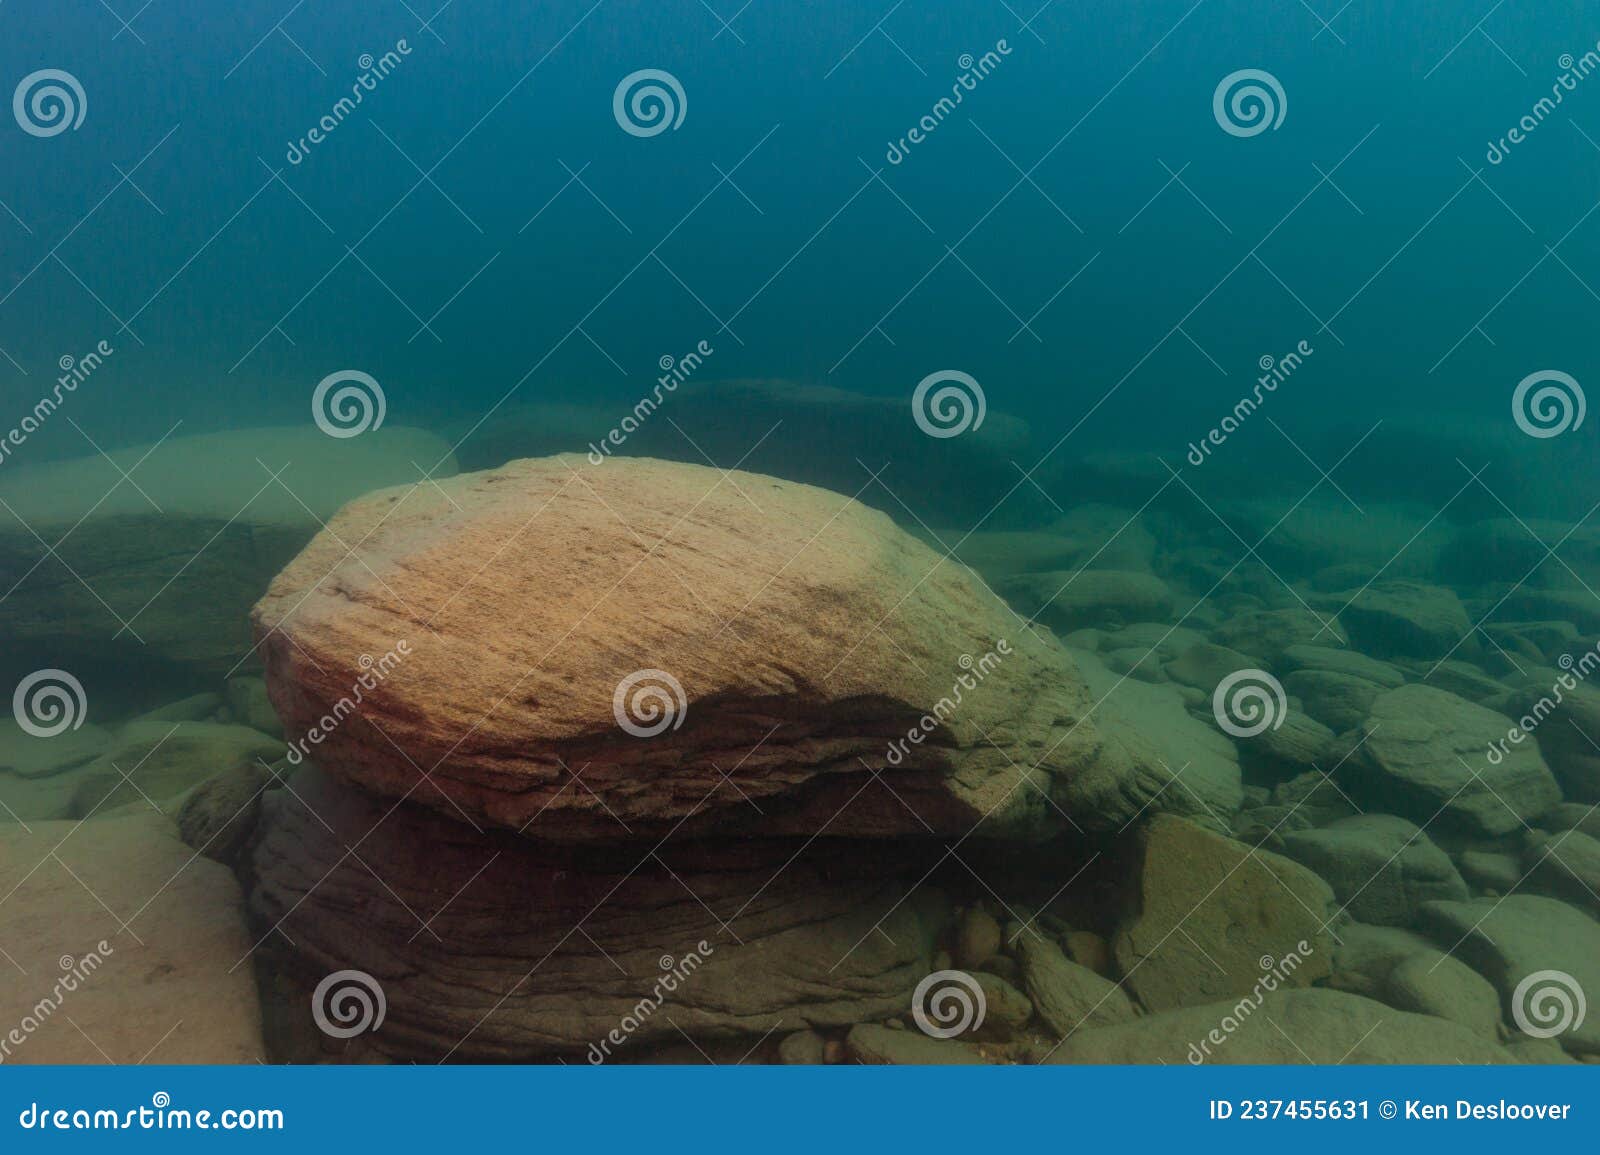 Unique Underwater Seascape with Very Large Boulders in the Lake ...